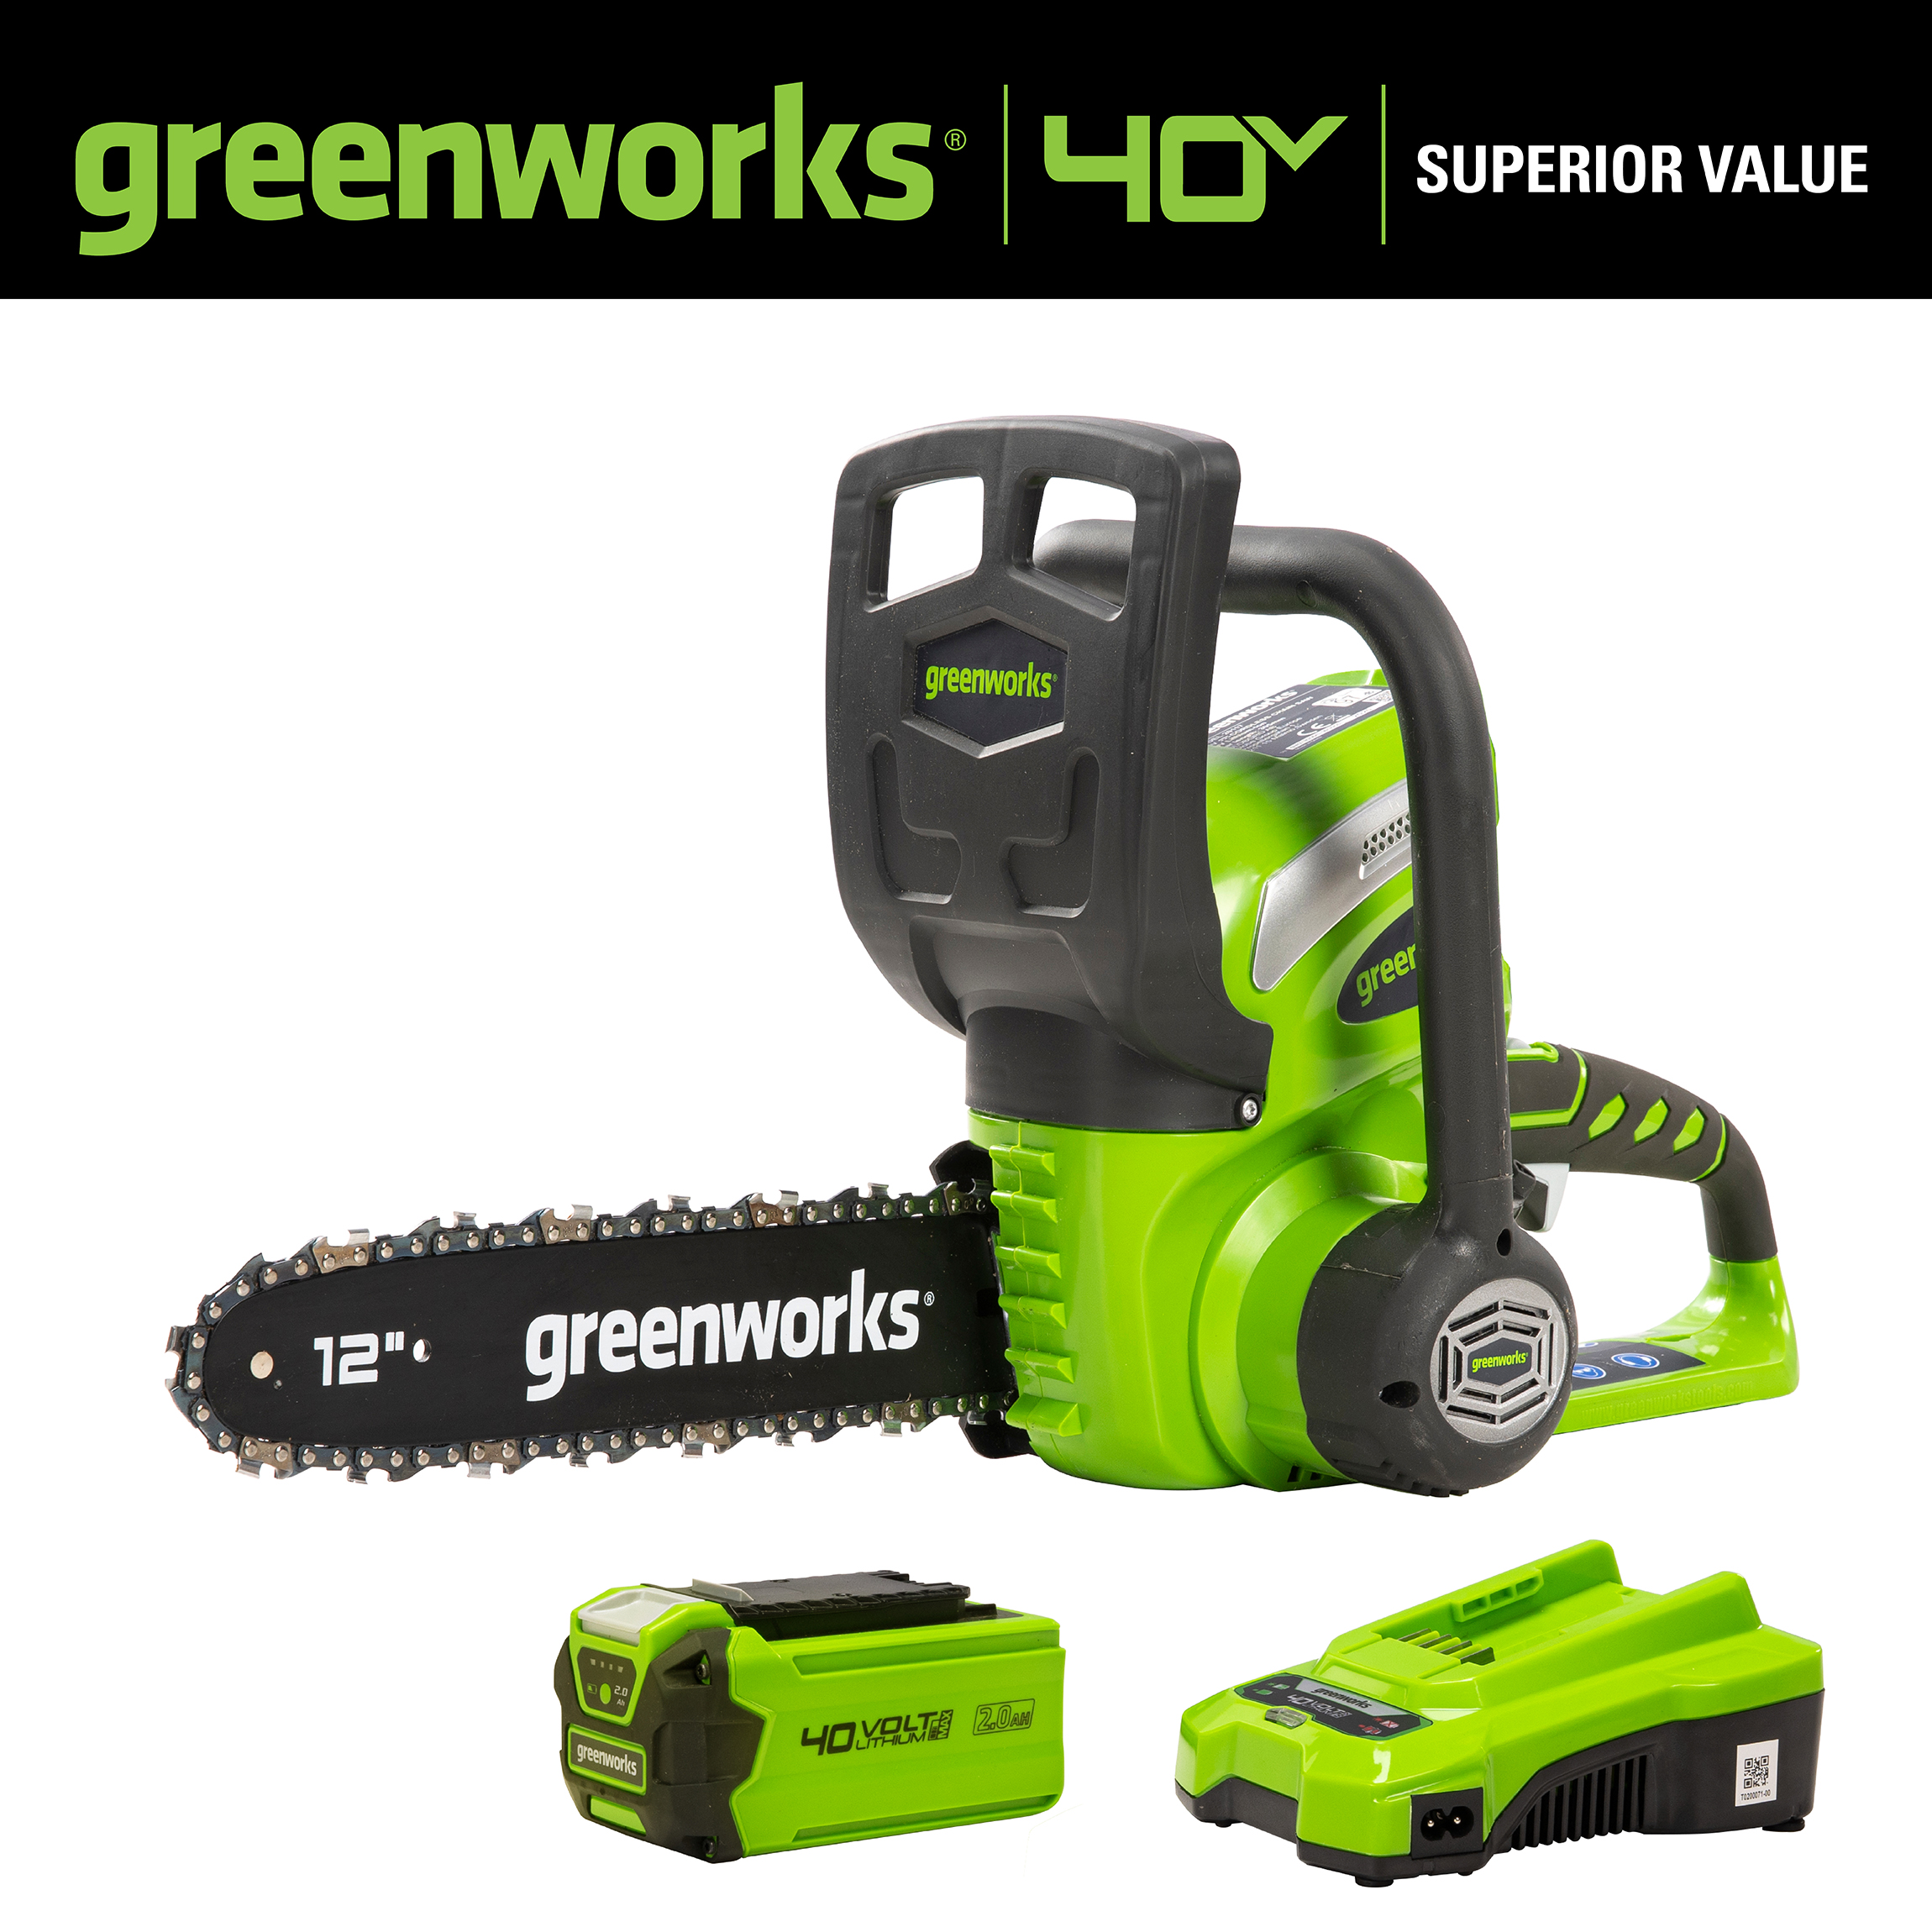 Greenworks 40V 12" Cordless Chainsaw with 2.0 Ah Battery & Charger, 20262 - image 4 of 14